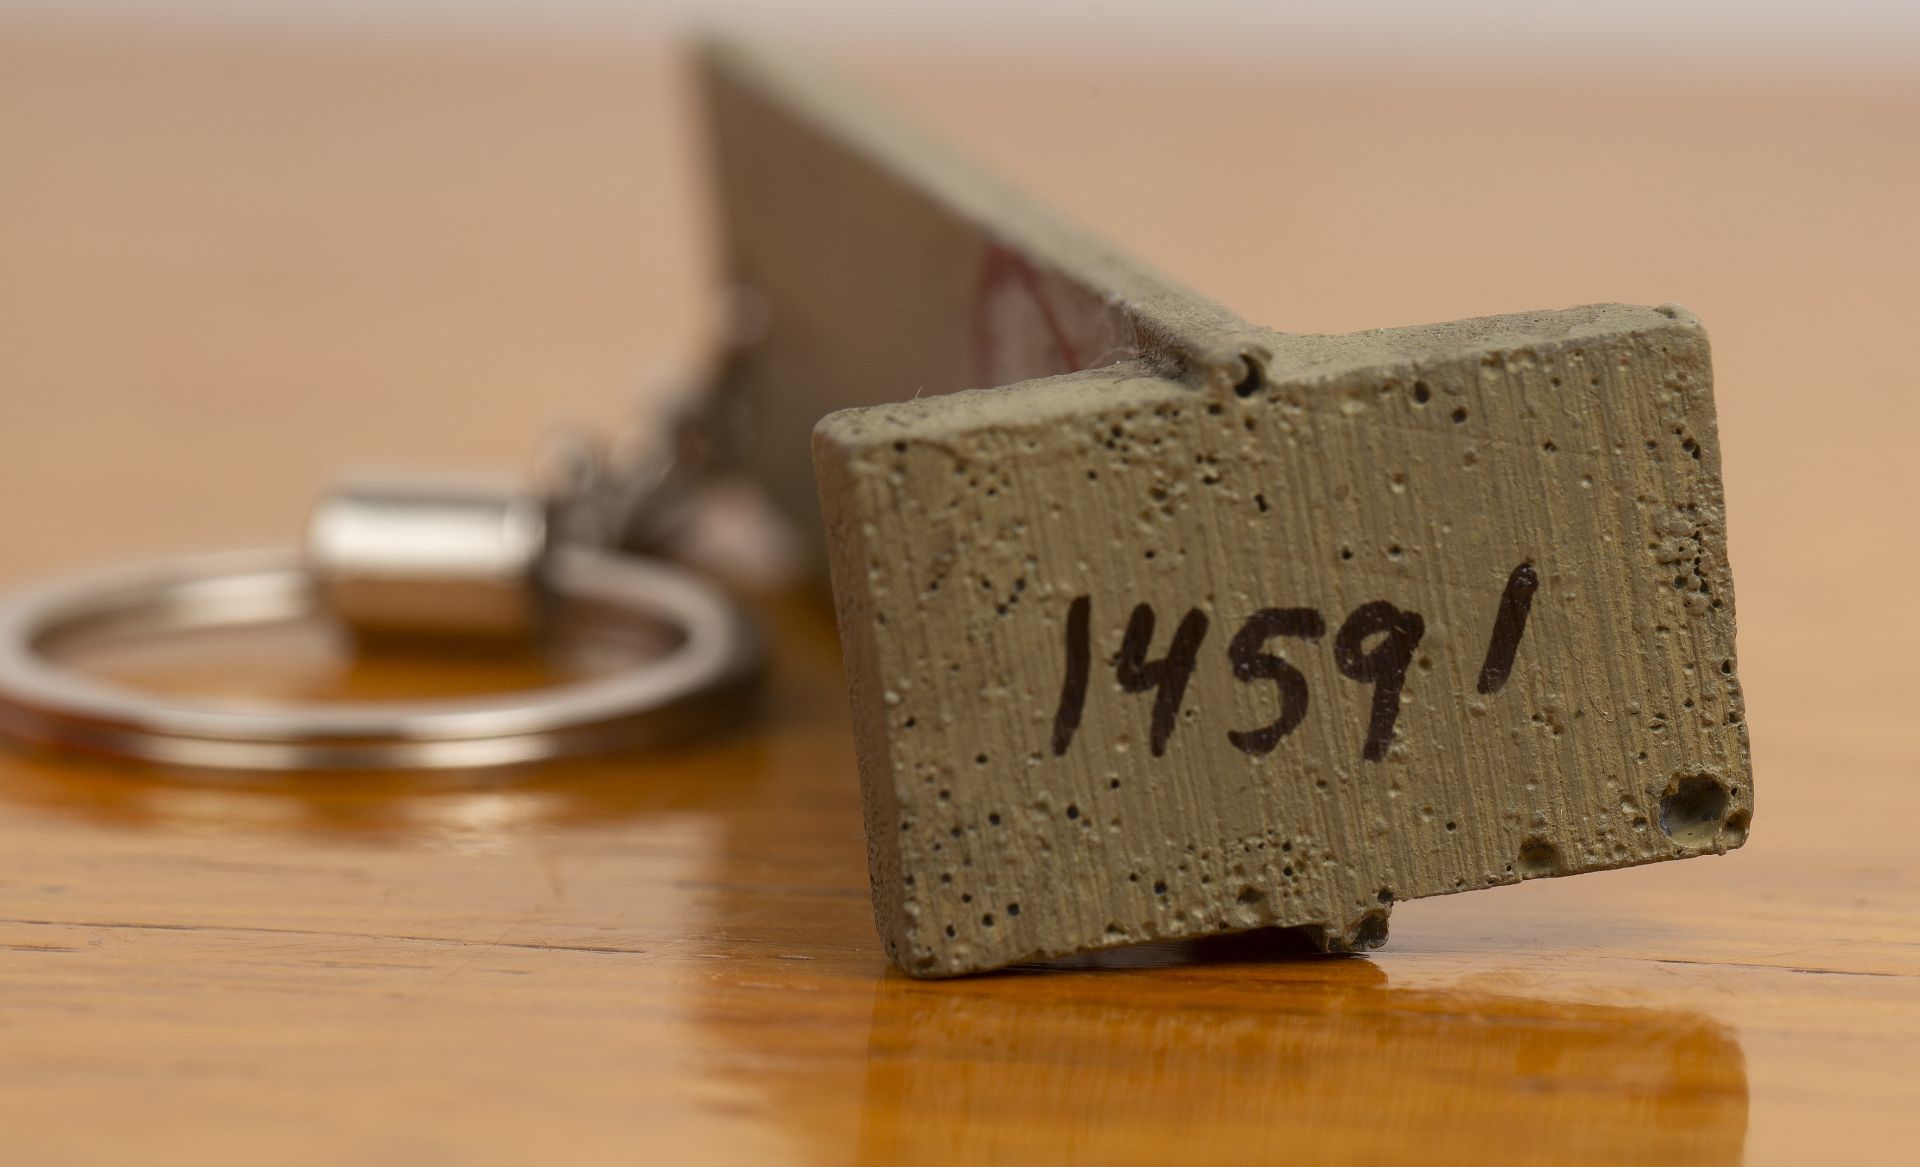 Banksy (b.1974) (The walled off hotel), freedom sculpture or key fob, painted wood, numbered 14591 - Bild 5 aus 6